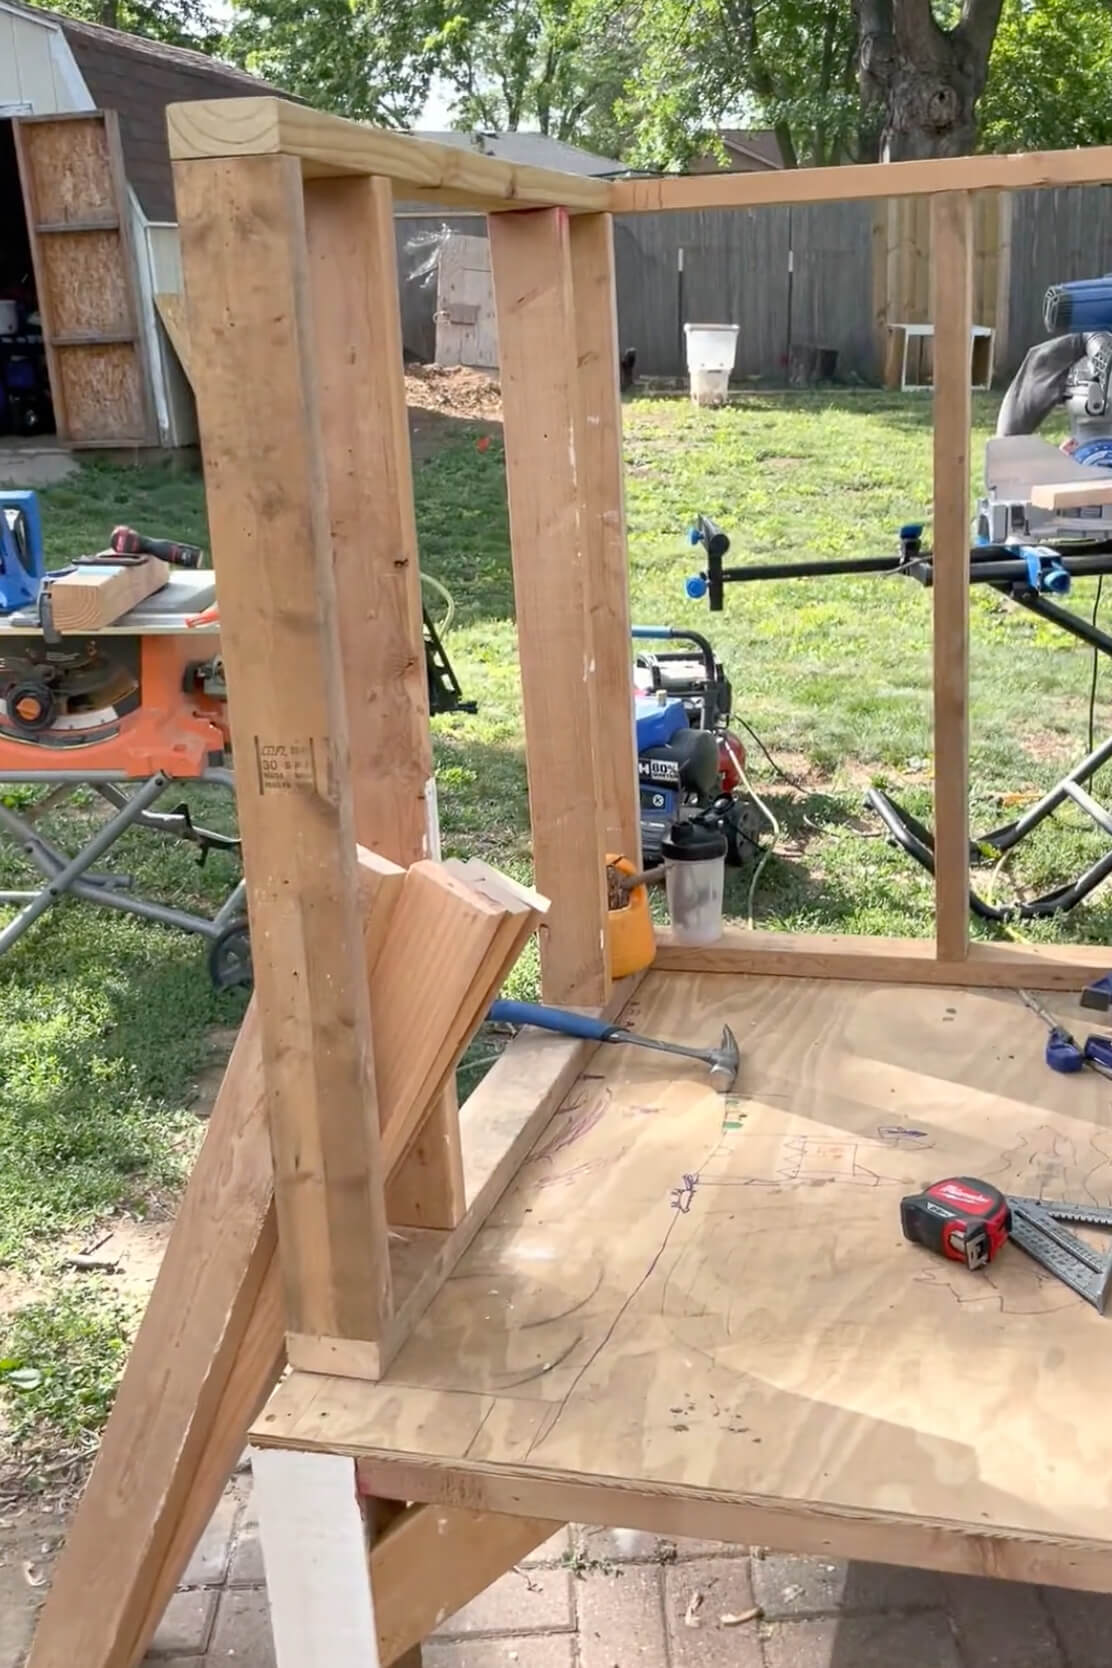 Framing in the walls of the backyard chicken coop.